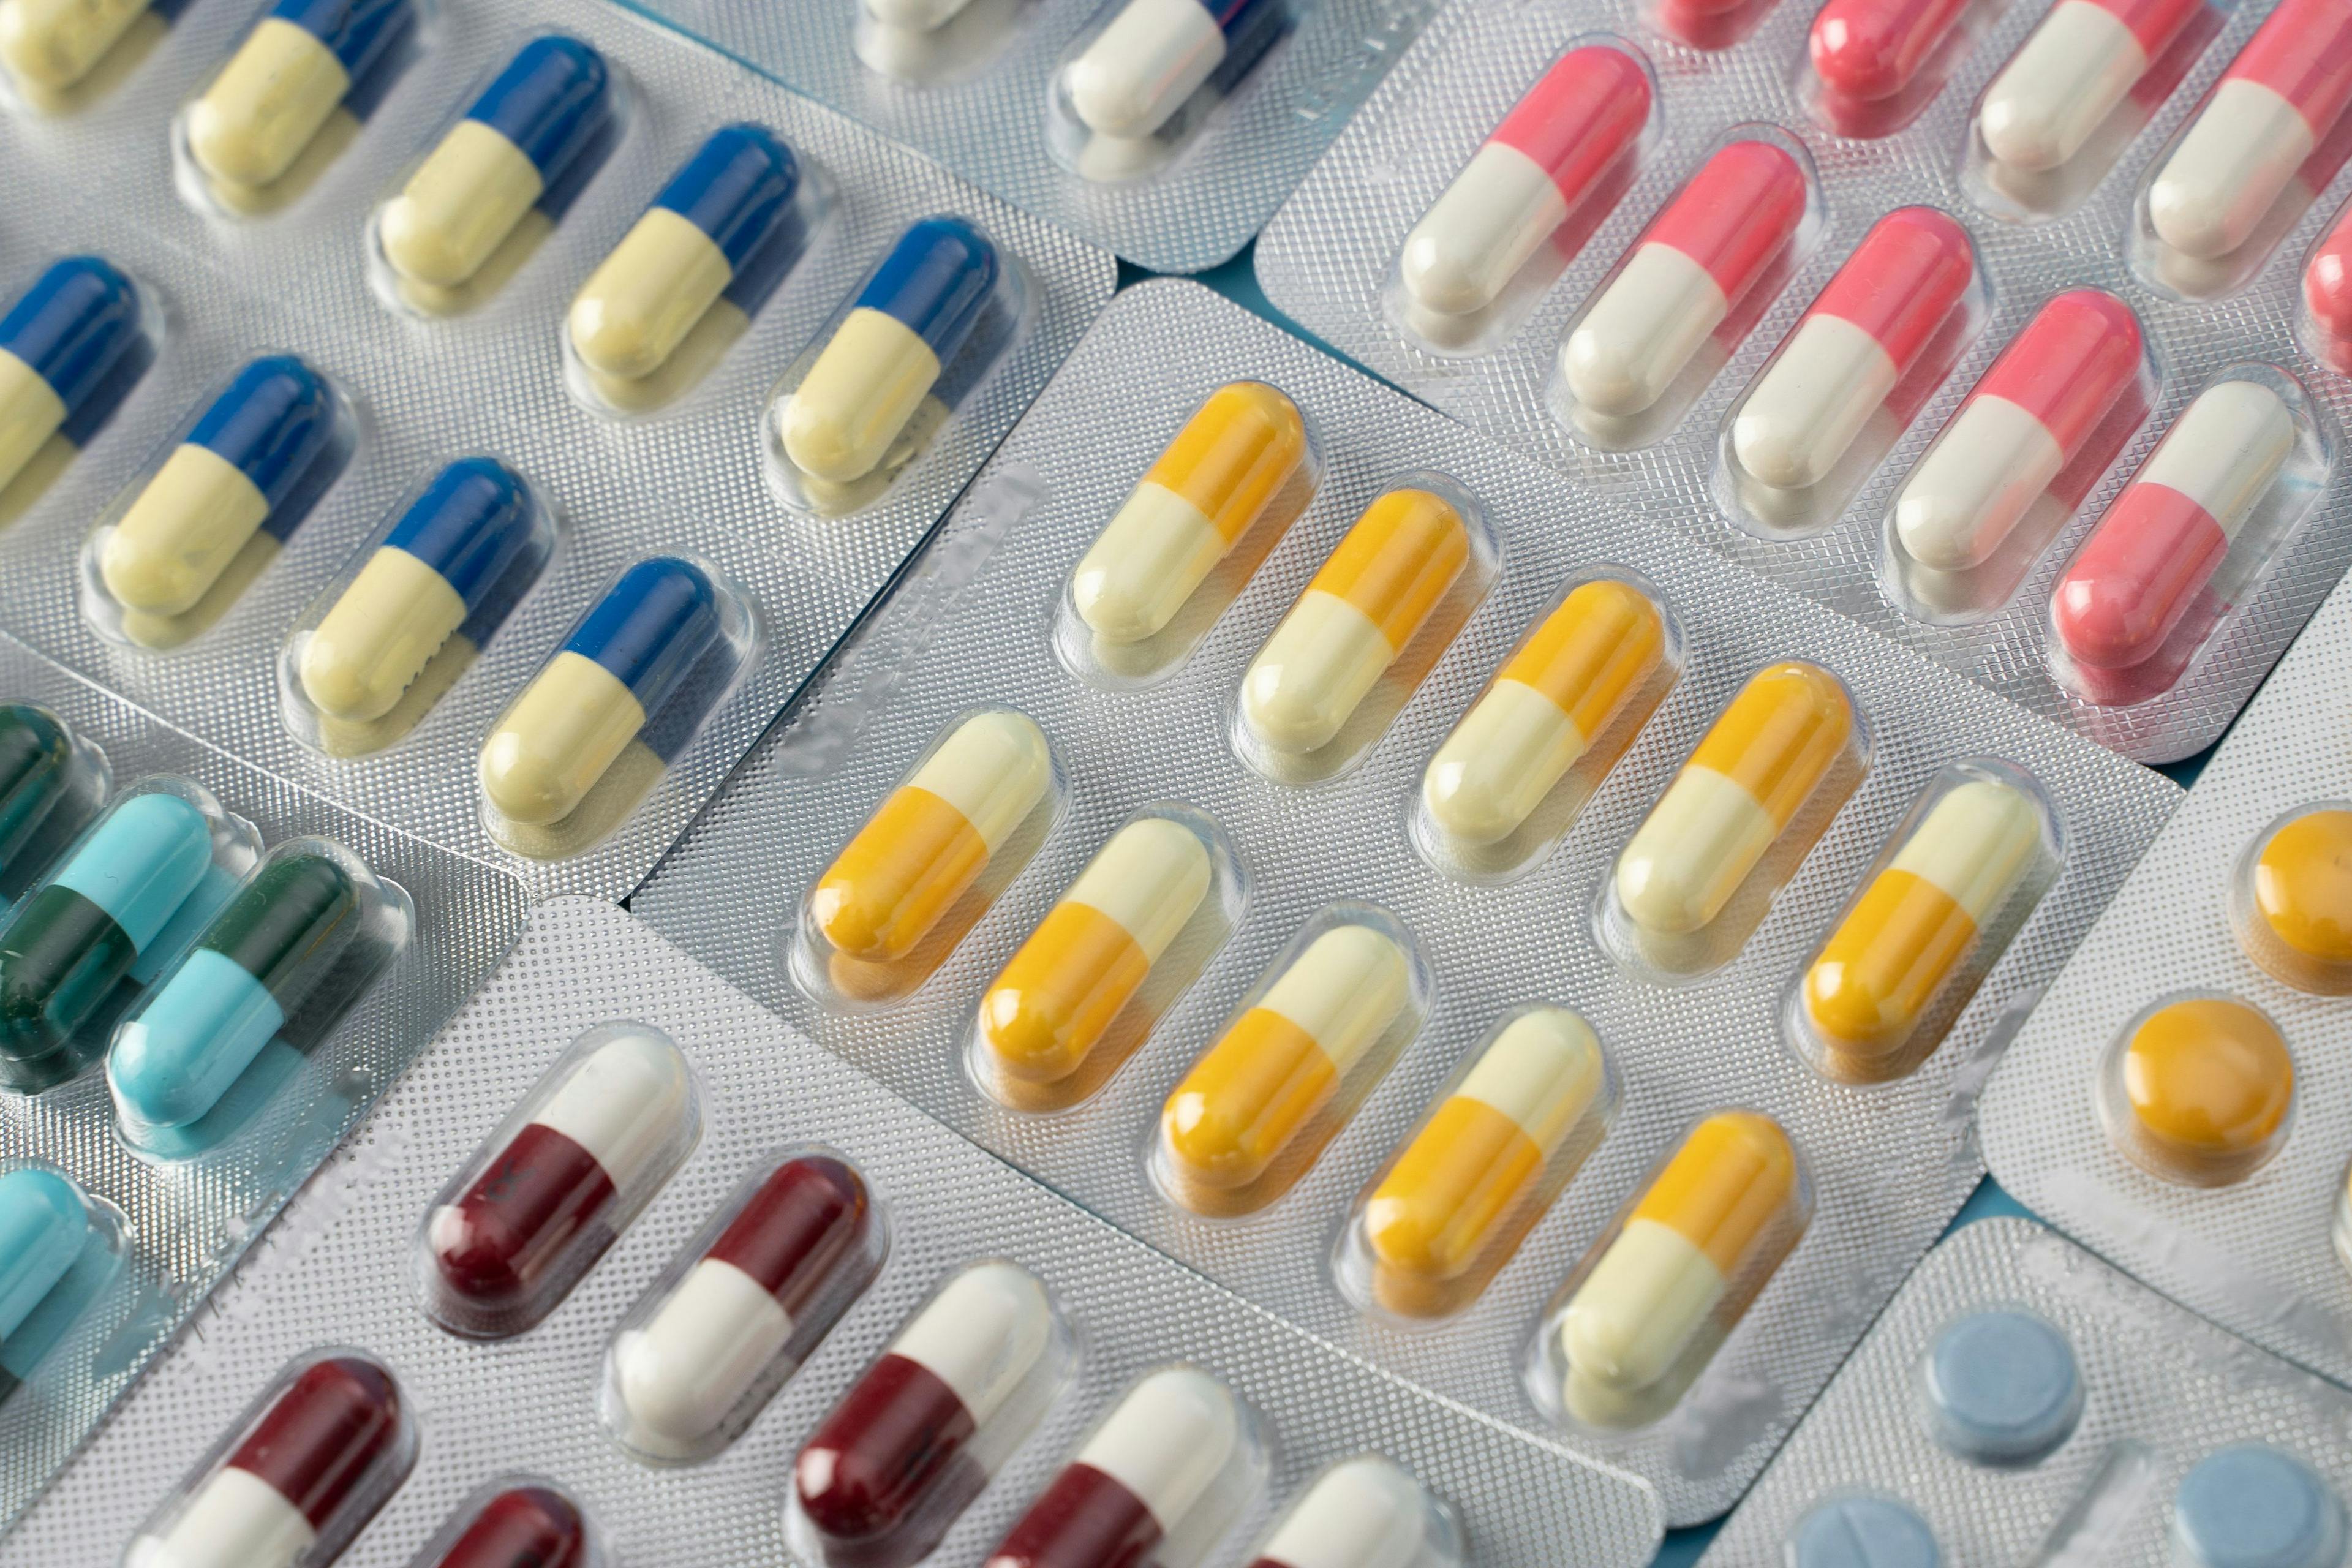 Antibiotic Use Associated With Increased Risk of IBD